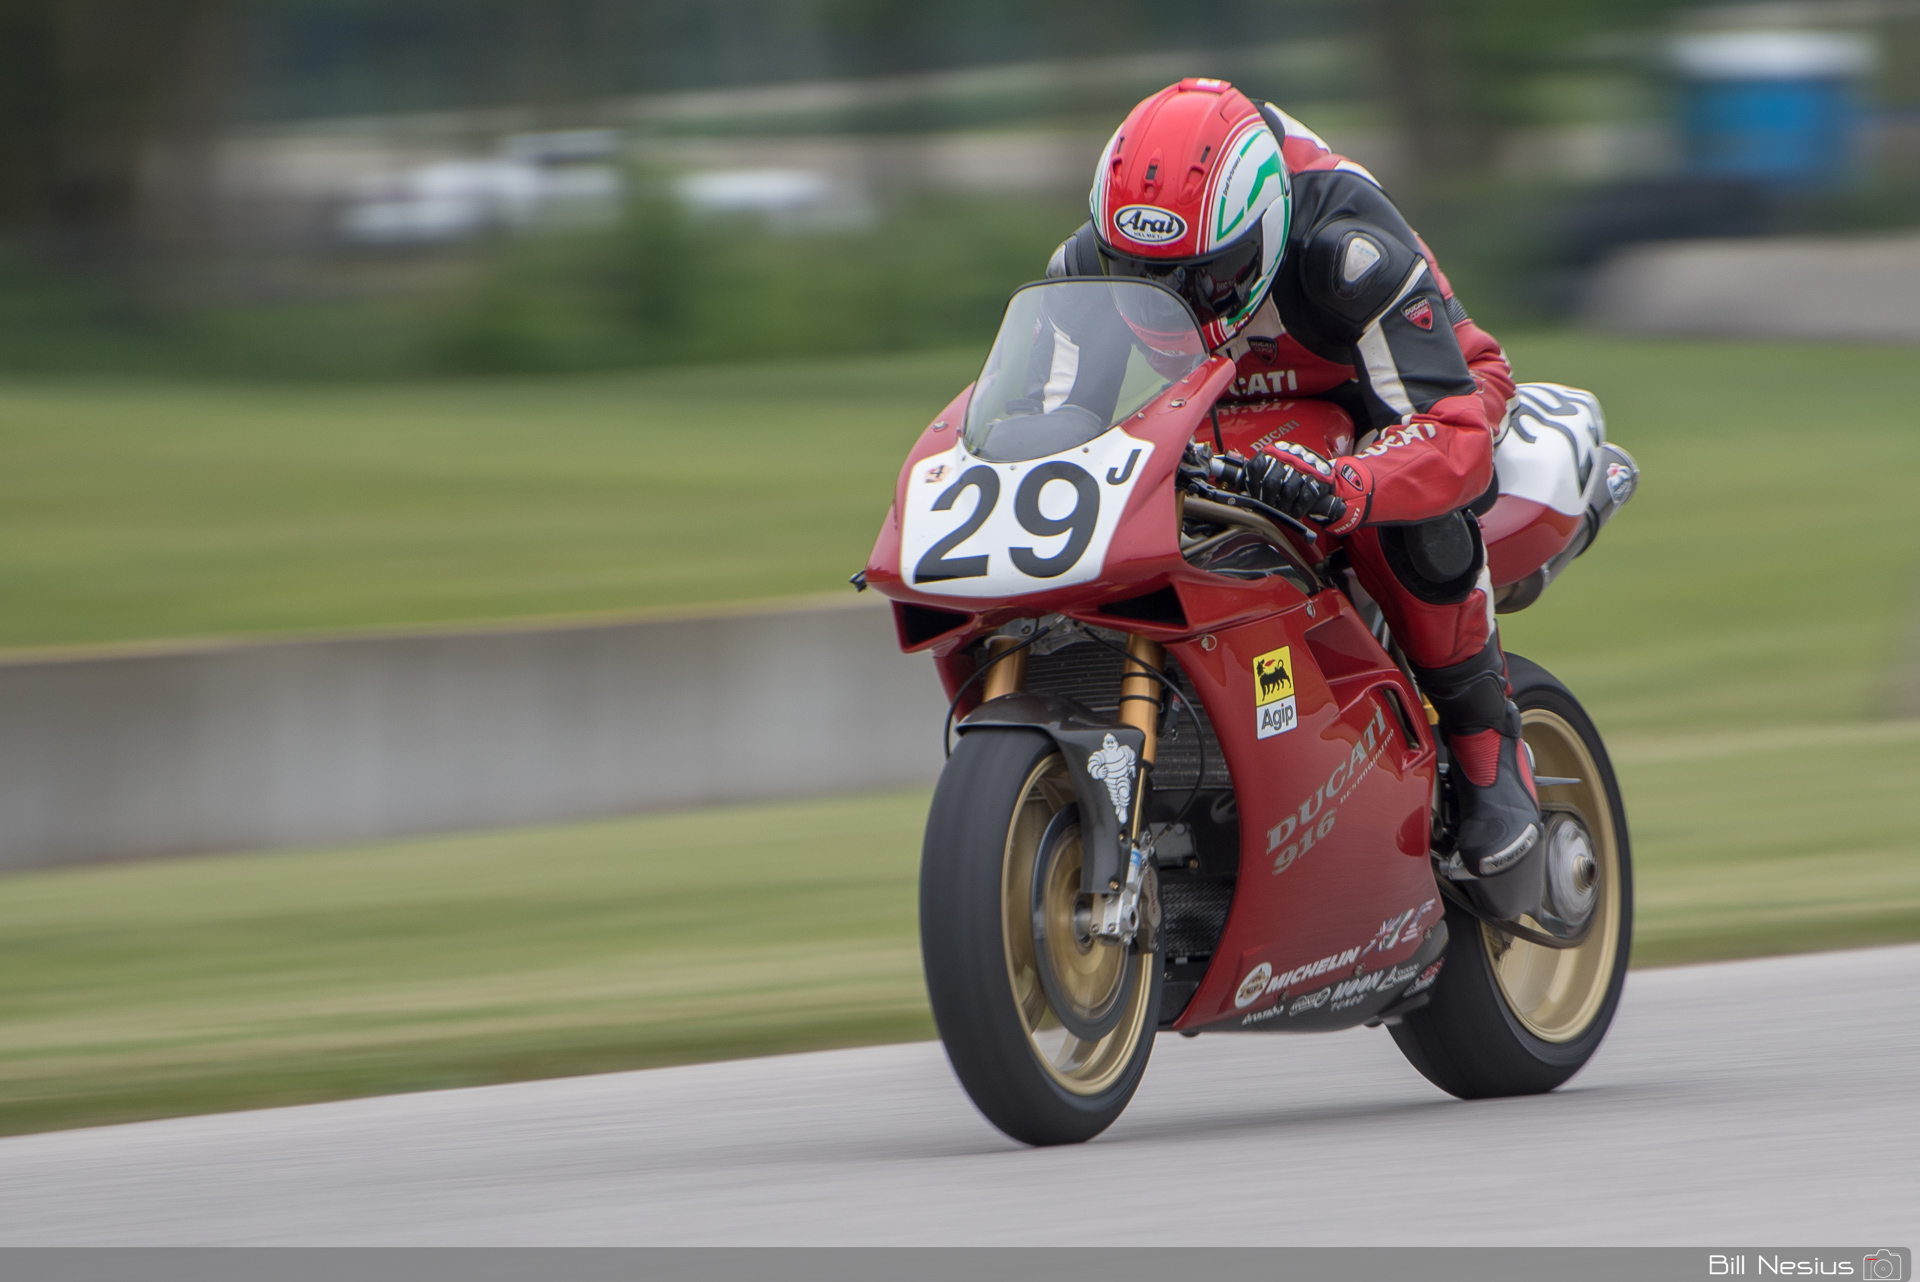 Ducati 916 on the back straight at Road America